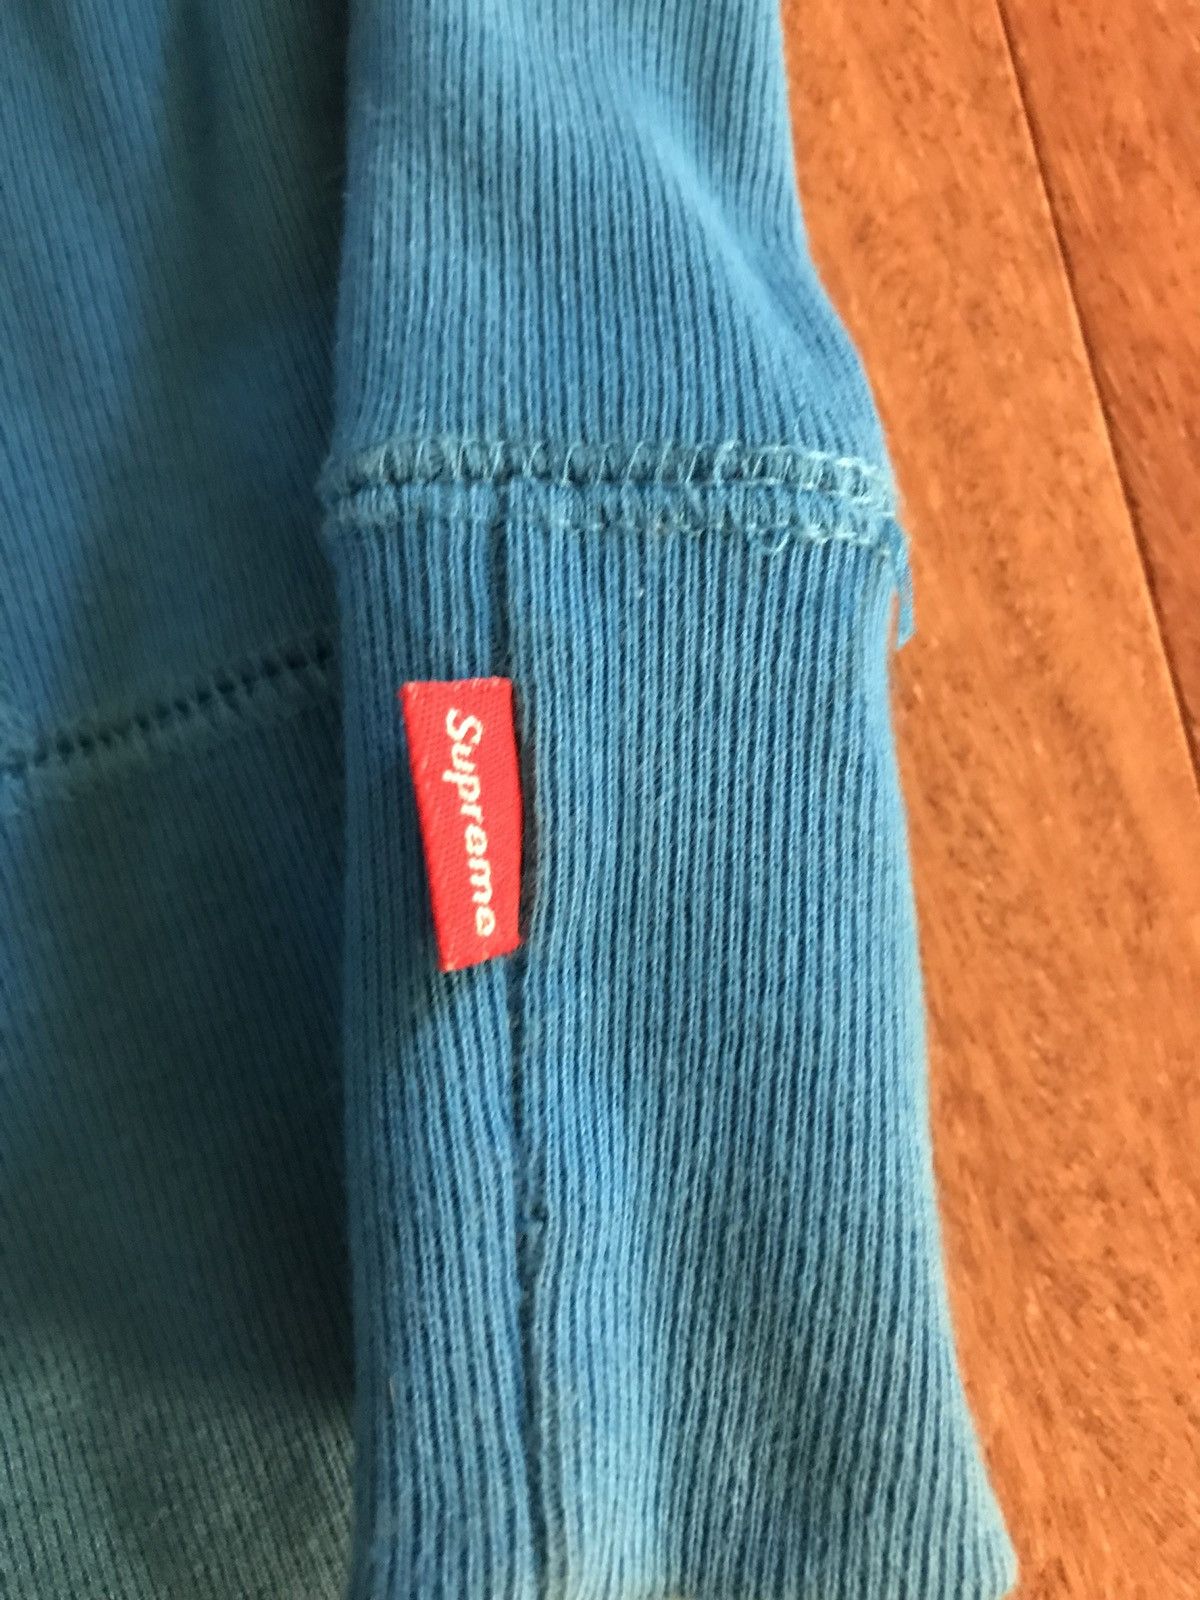 Supreme JA Handstyle Tag Hoodie Size US XL / EU 56 / 4 - 8 Preview